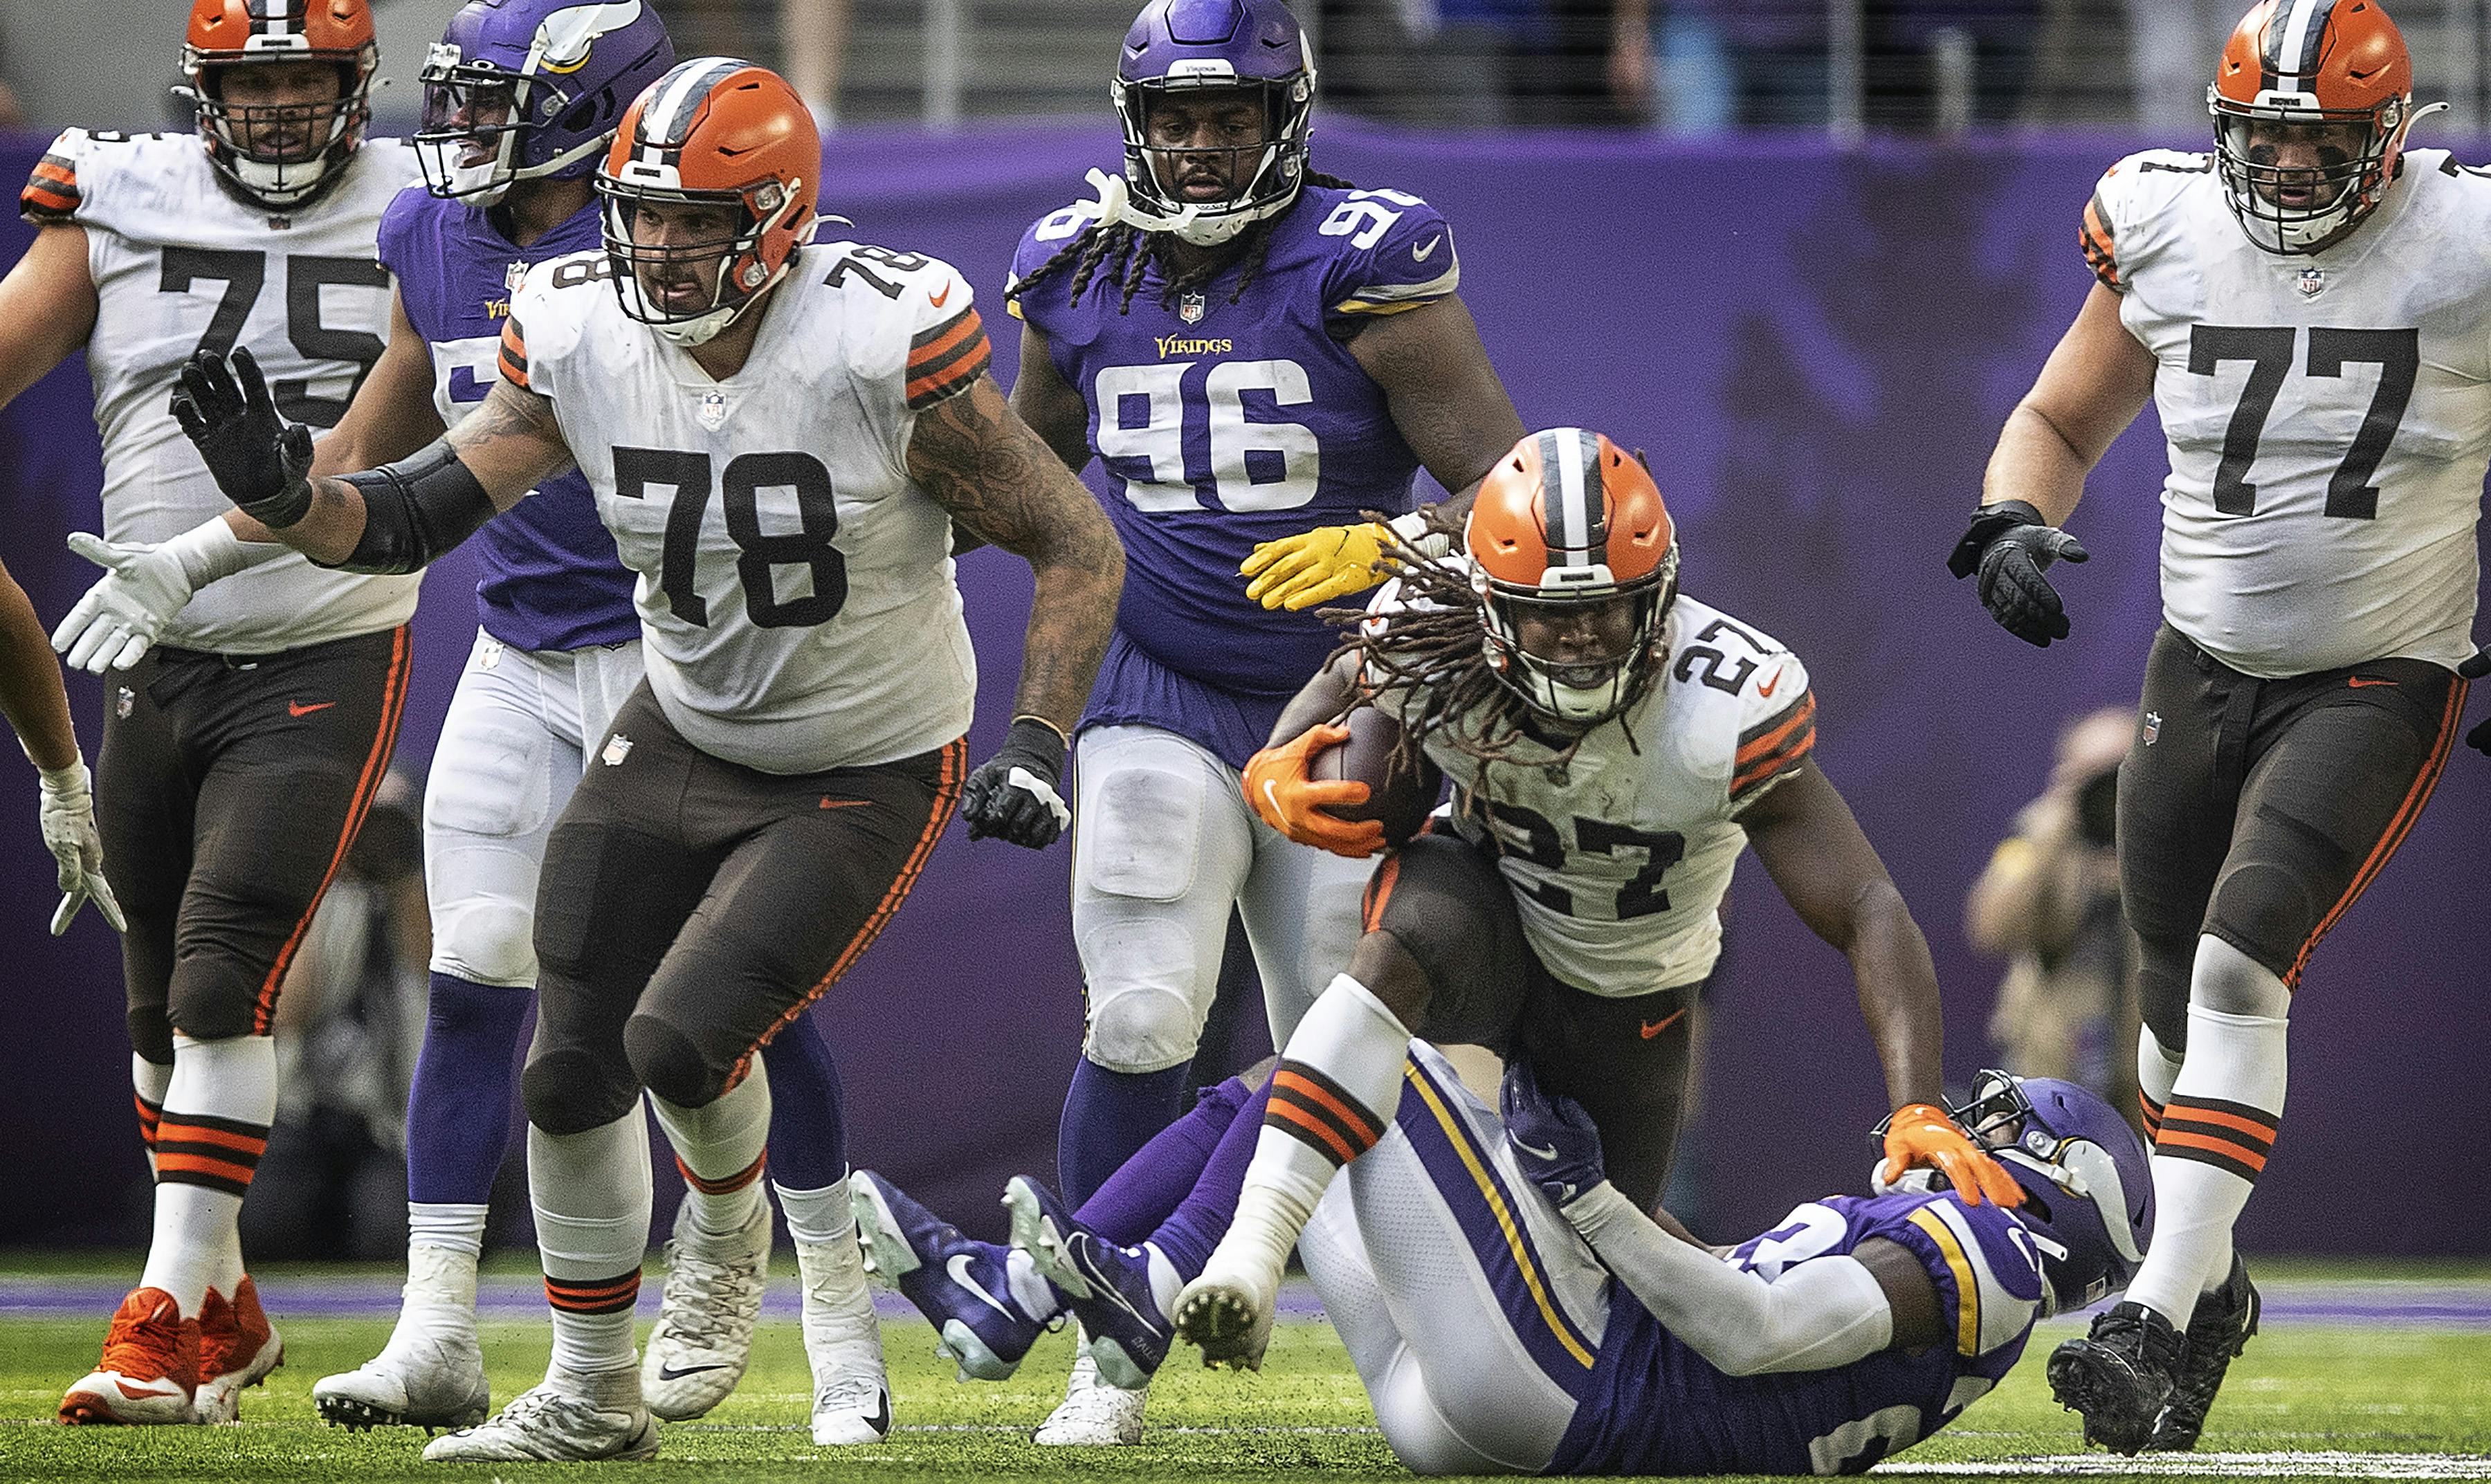 Vikings drop another close game, fall to 1-3 with loss to Browns